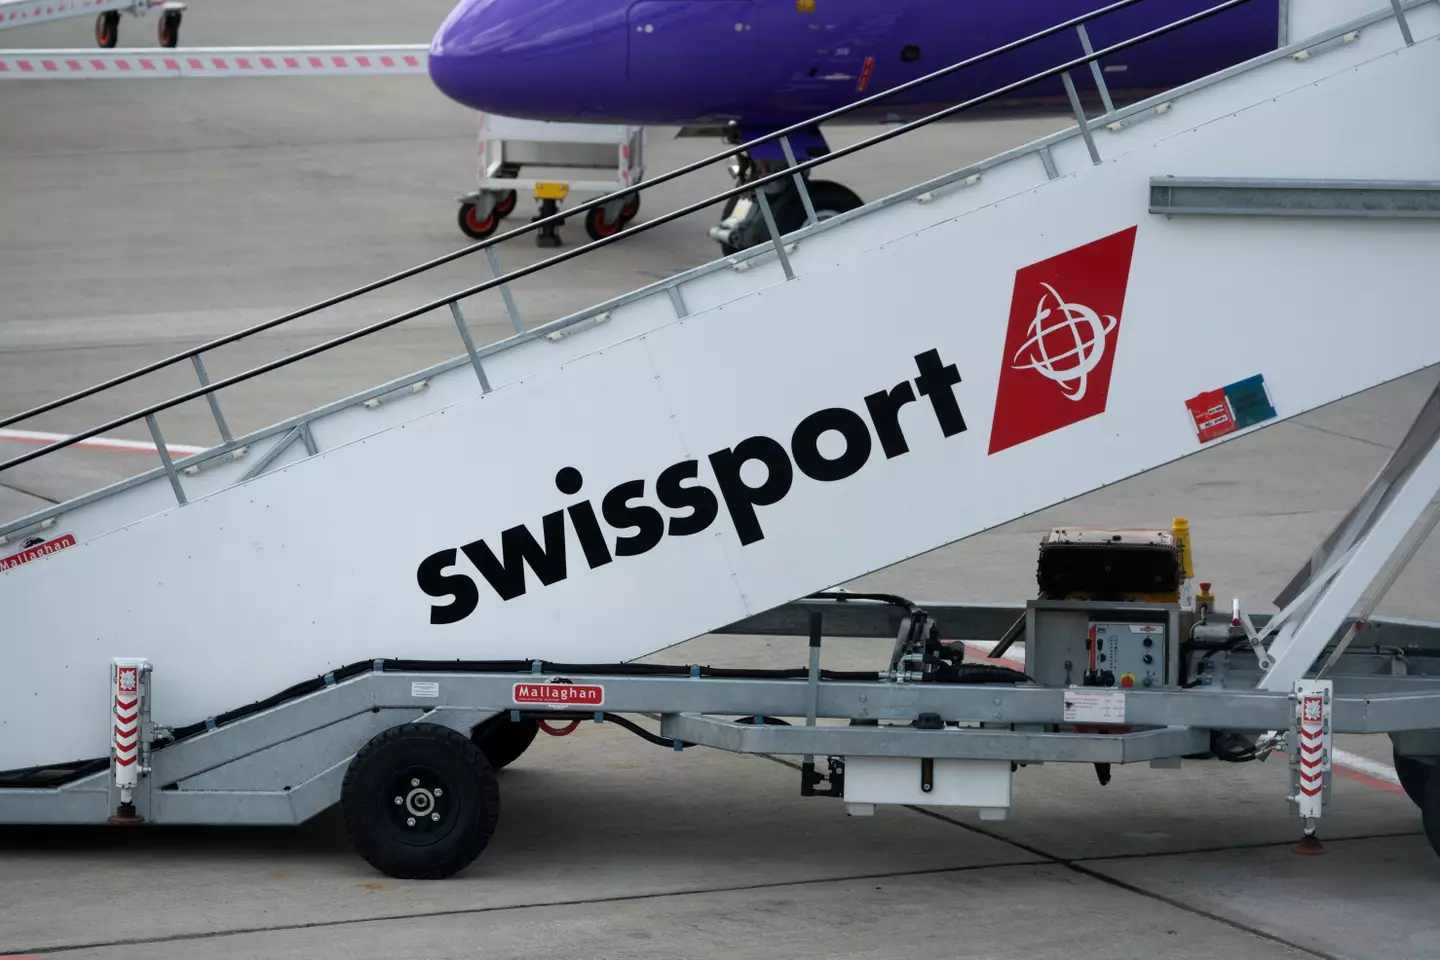 The pilot of the TUI flight accused Swissport of having 'abandoned' the plane and its passengers.